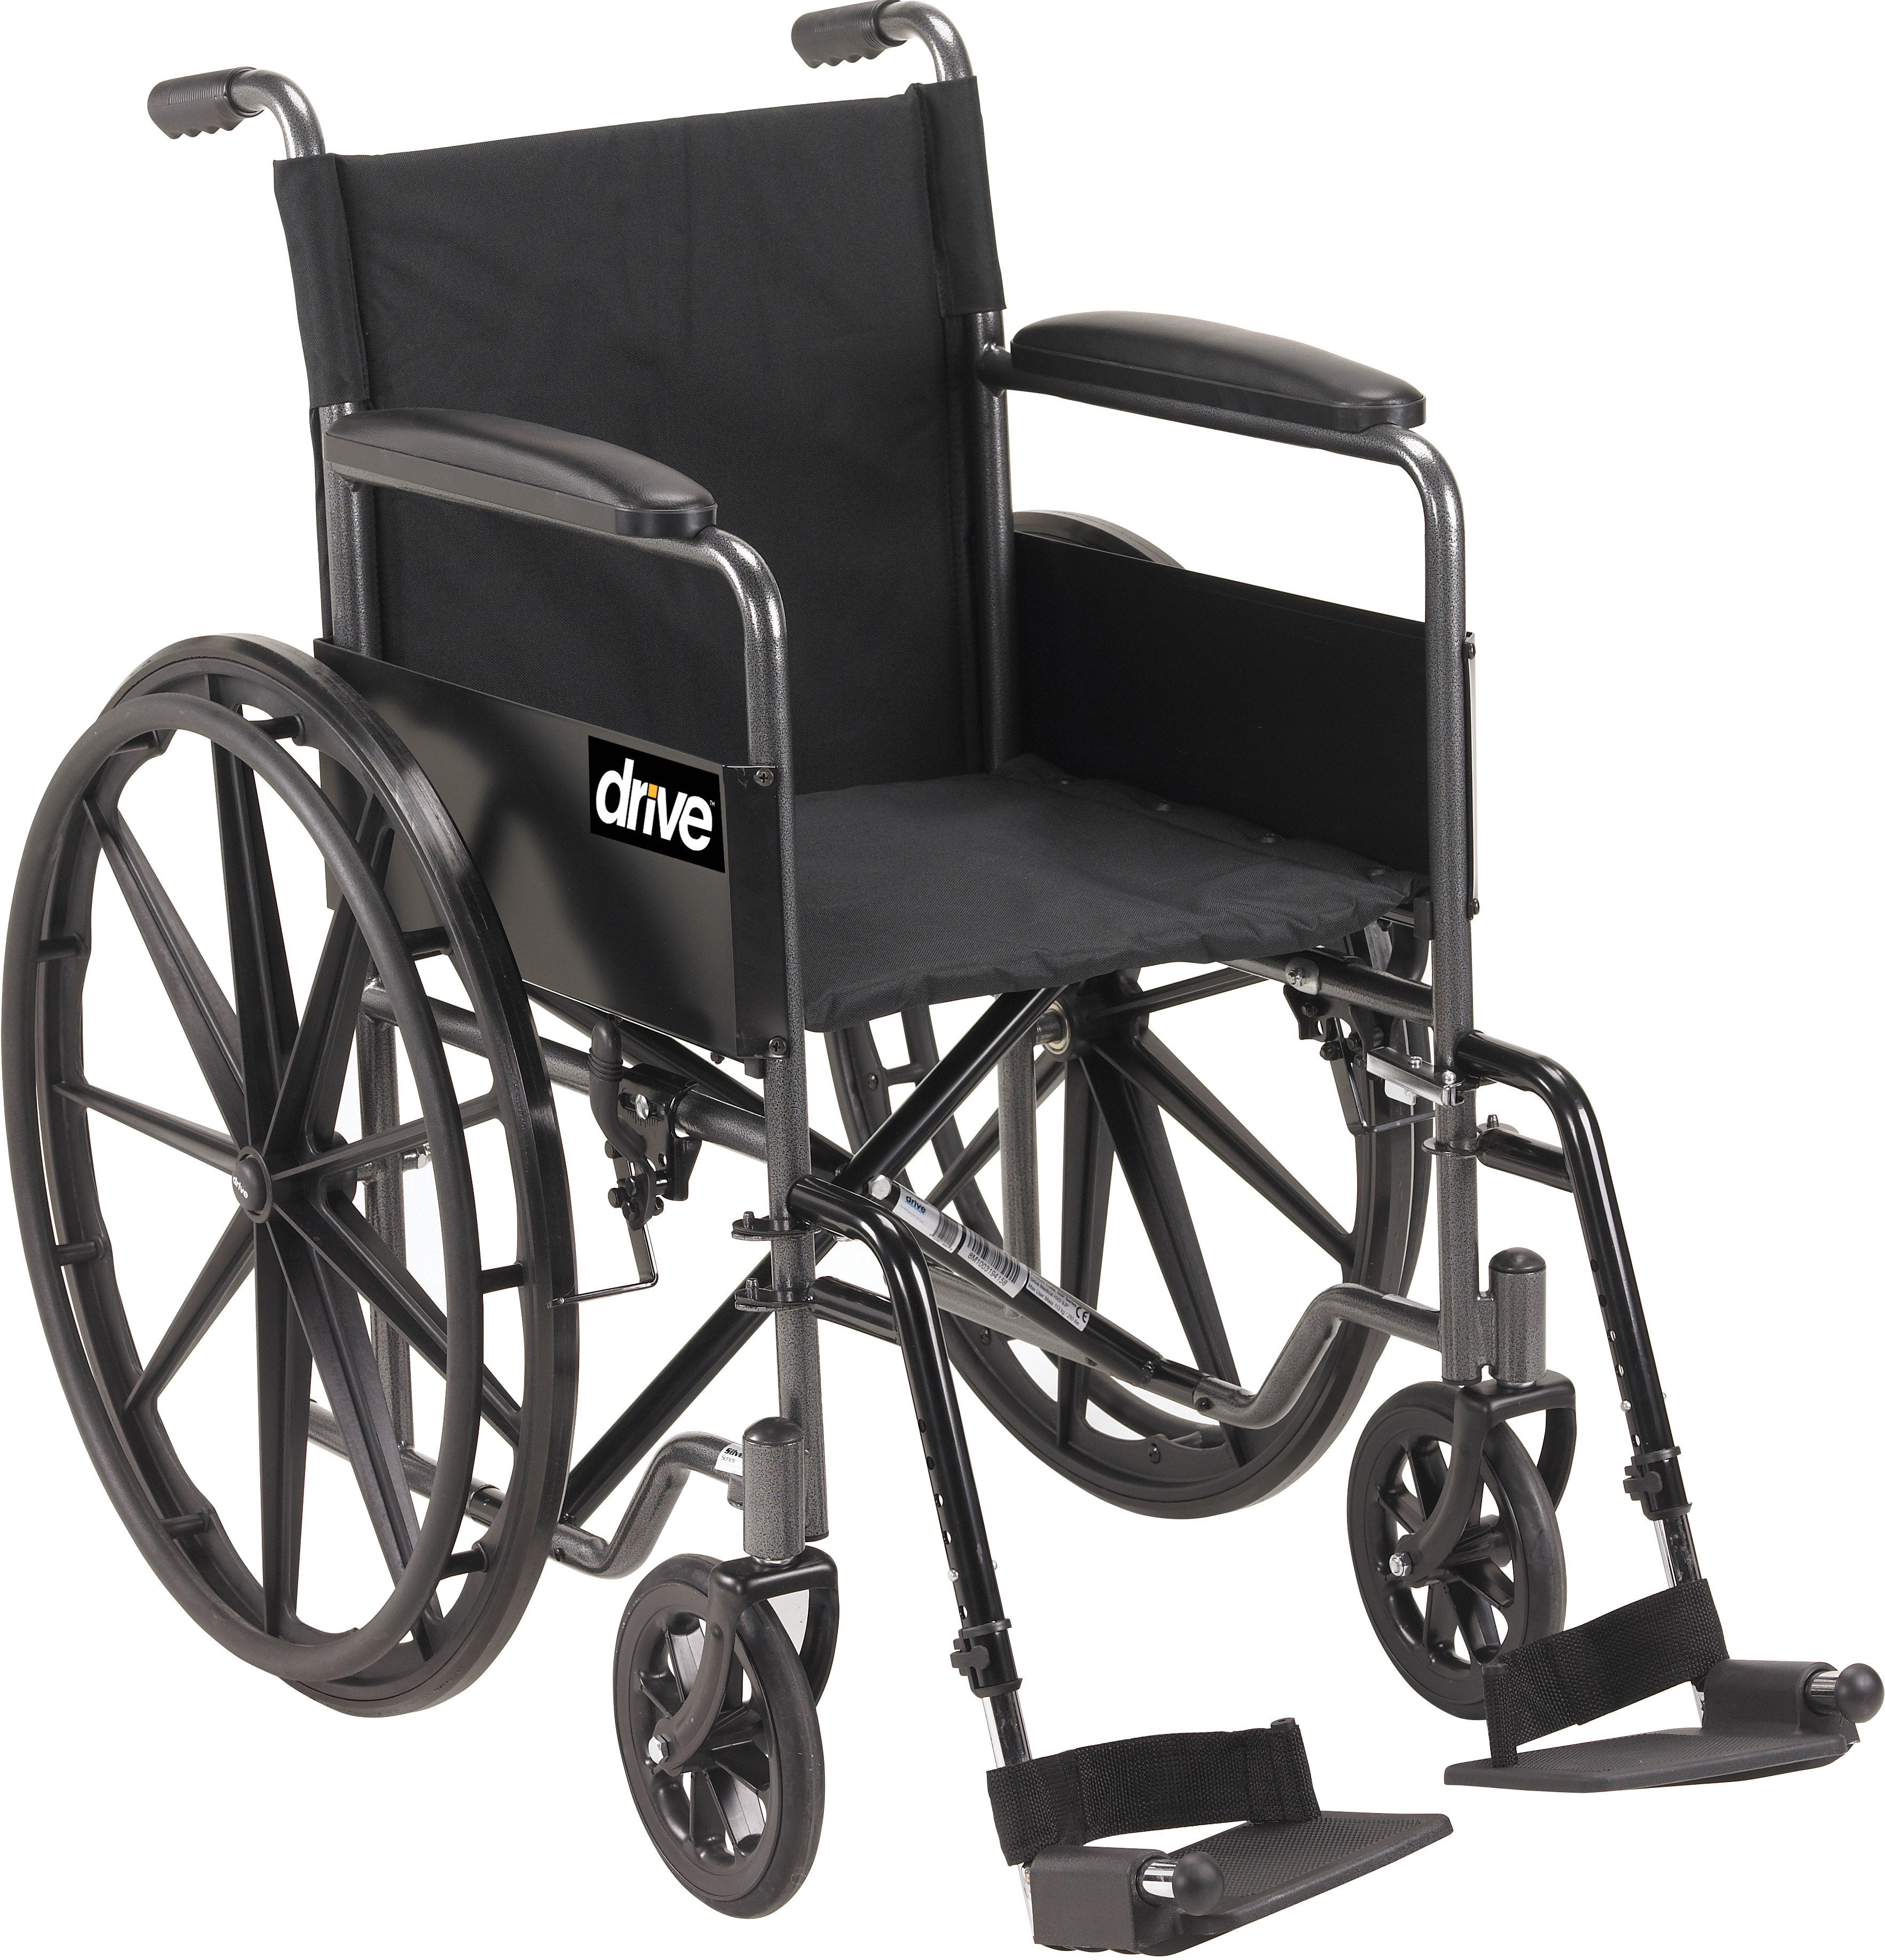 Wheelchair driveª Silver Sport 1 Swing-Away Footrest Black Upholstery 18 Inch Seat Width Adult 300 lbs. Weight Capacity